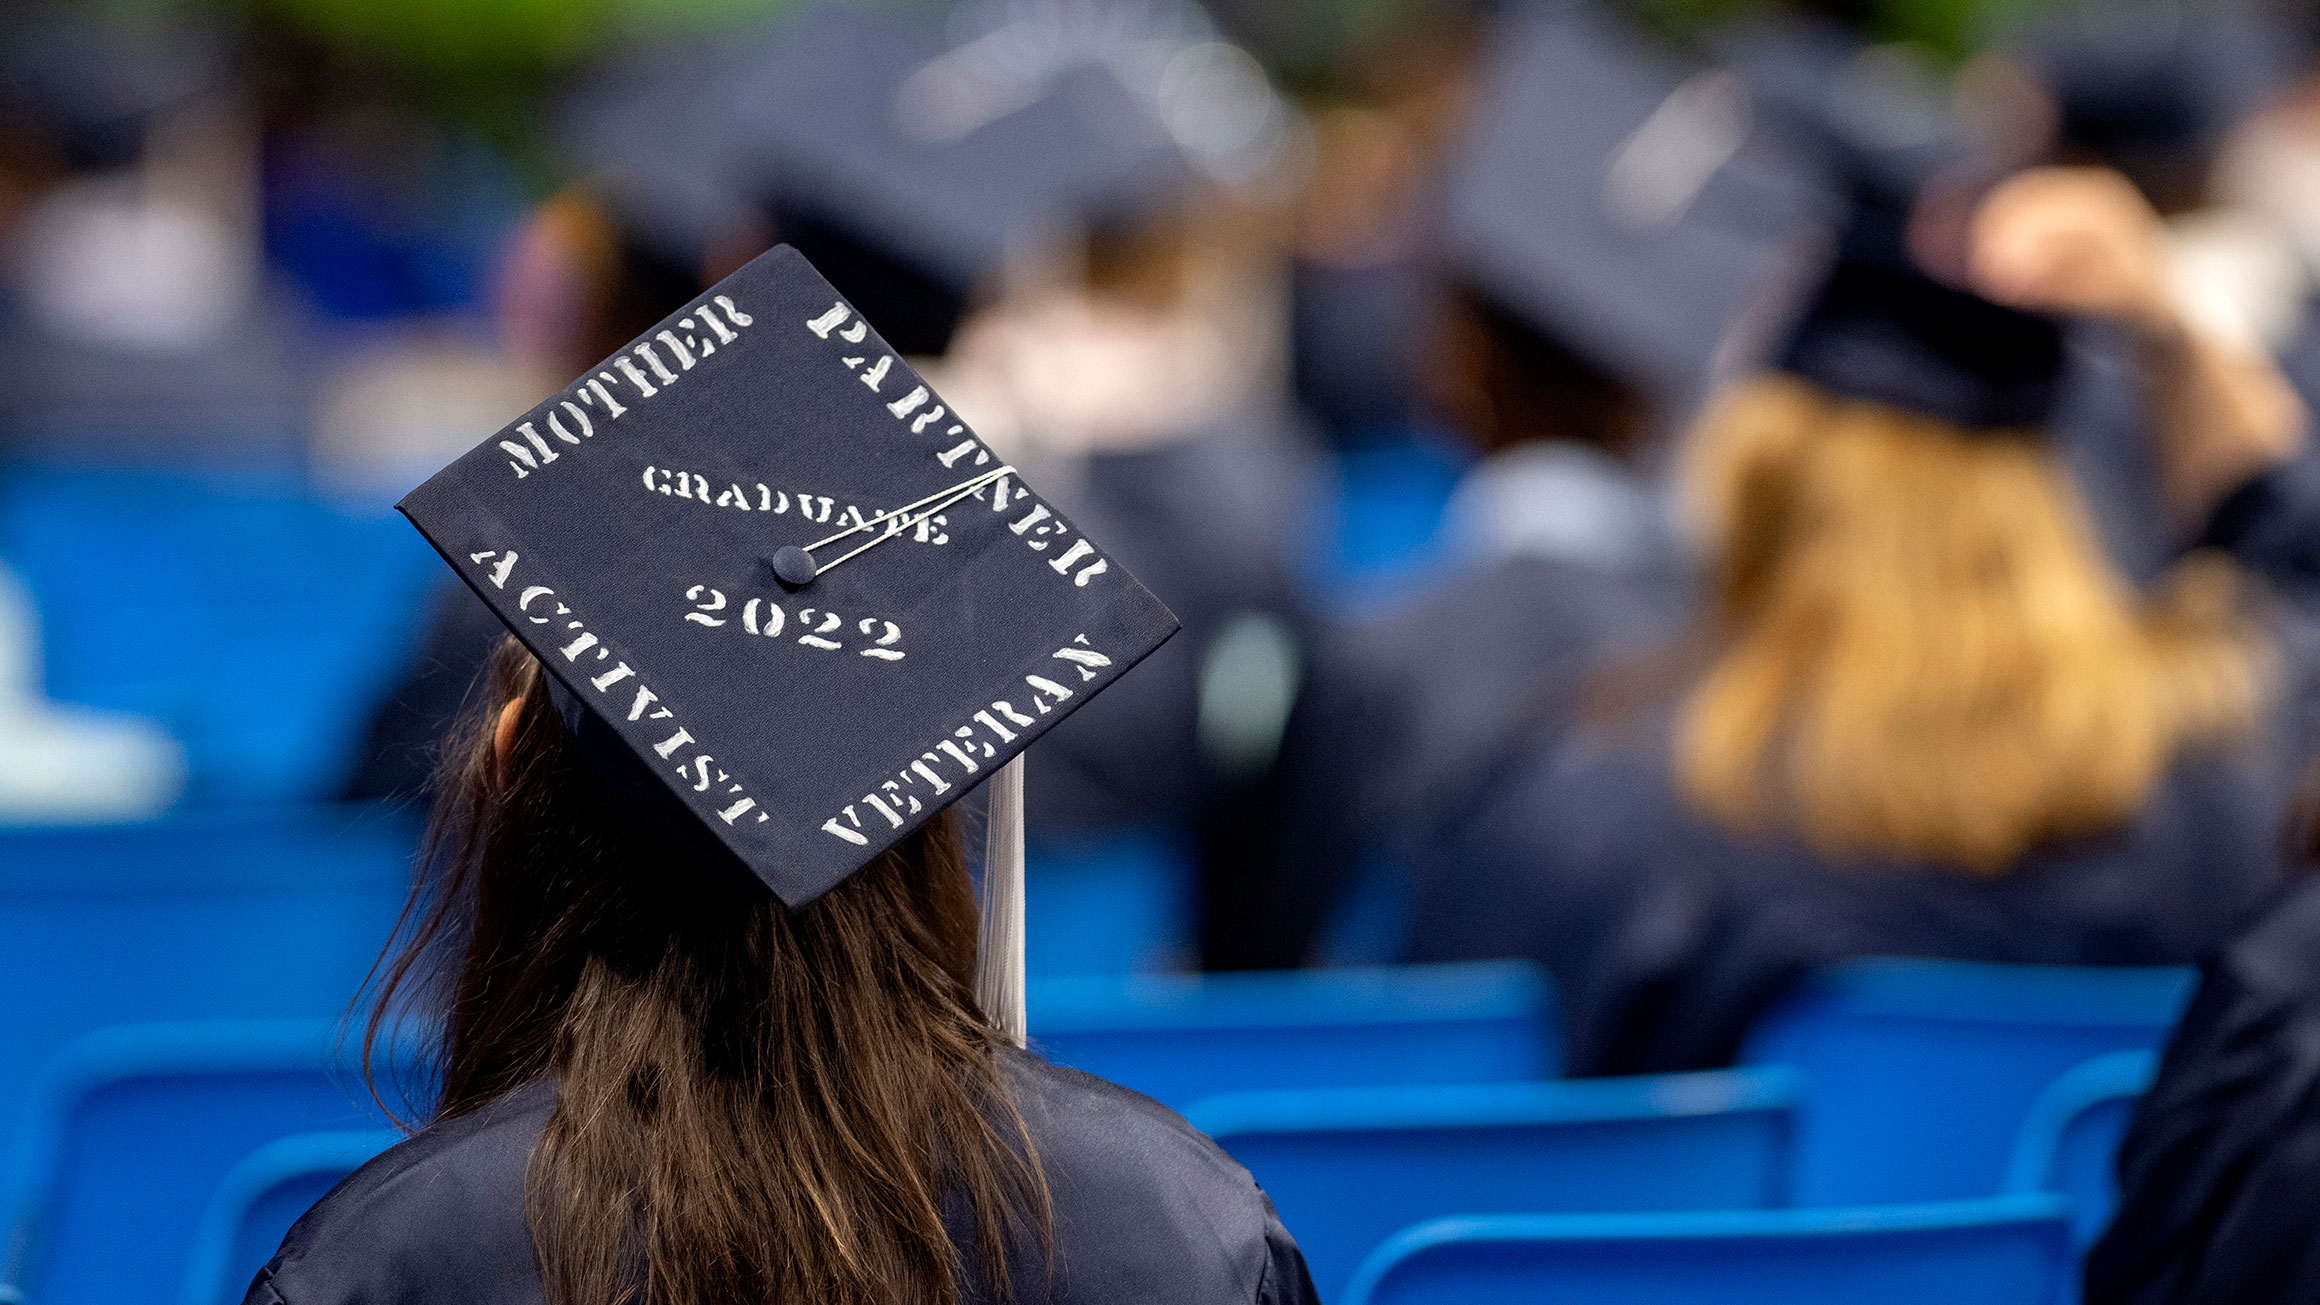 A student wears a cap that says mother, partner, activist, veteran while sitting at graduation